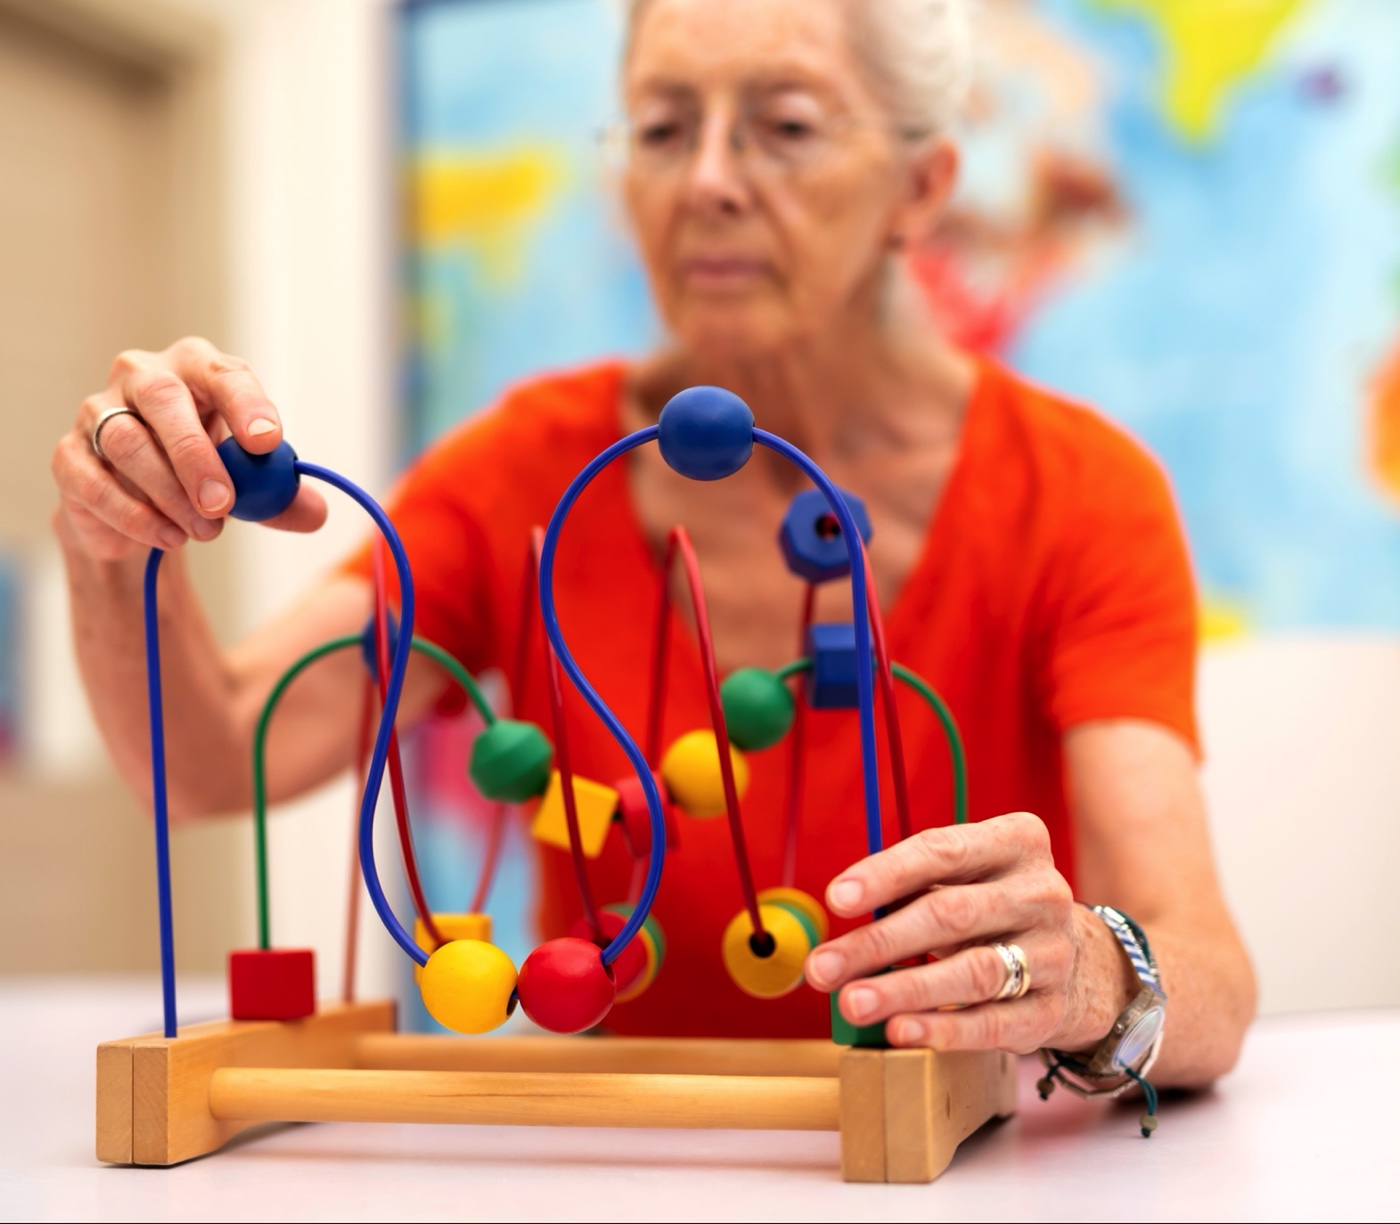 Senior resident interacting with a sensory toy for mental stimulation